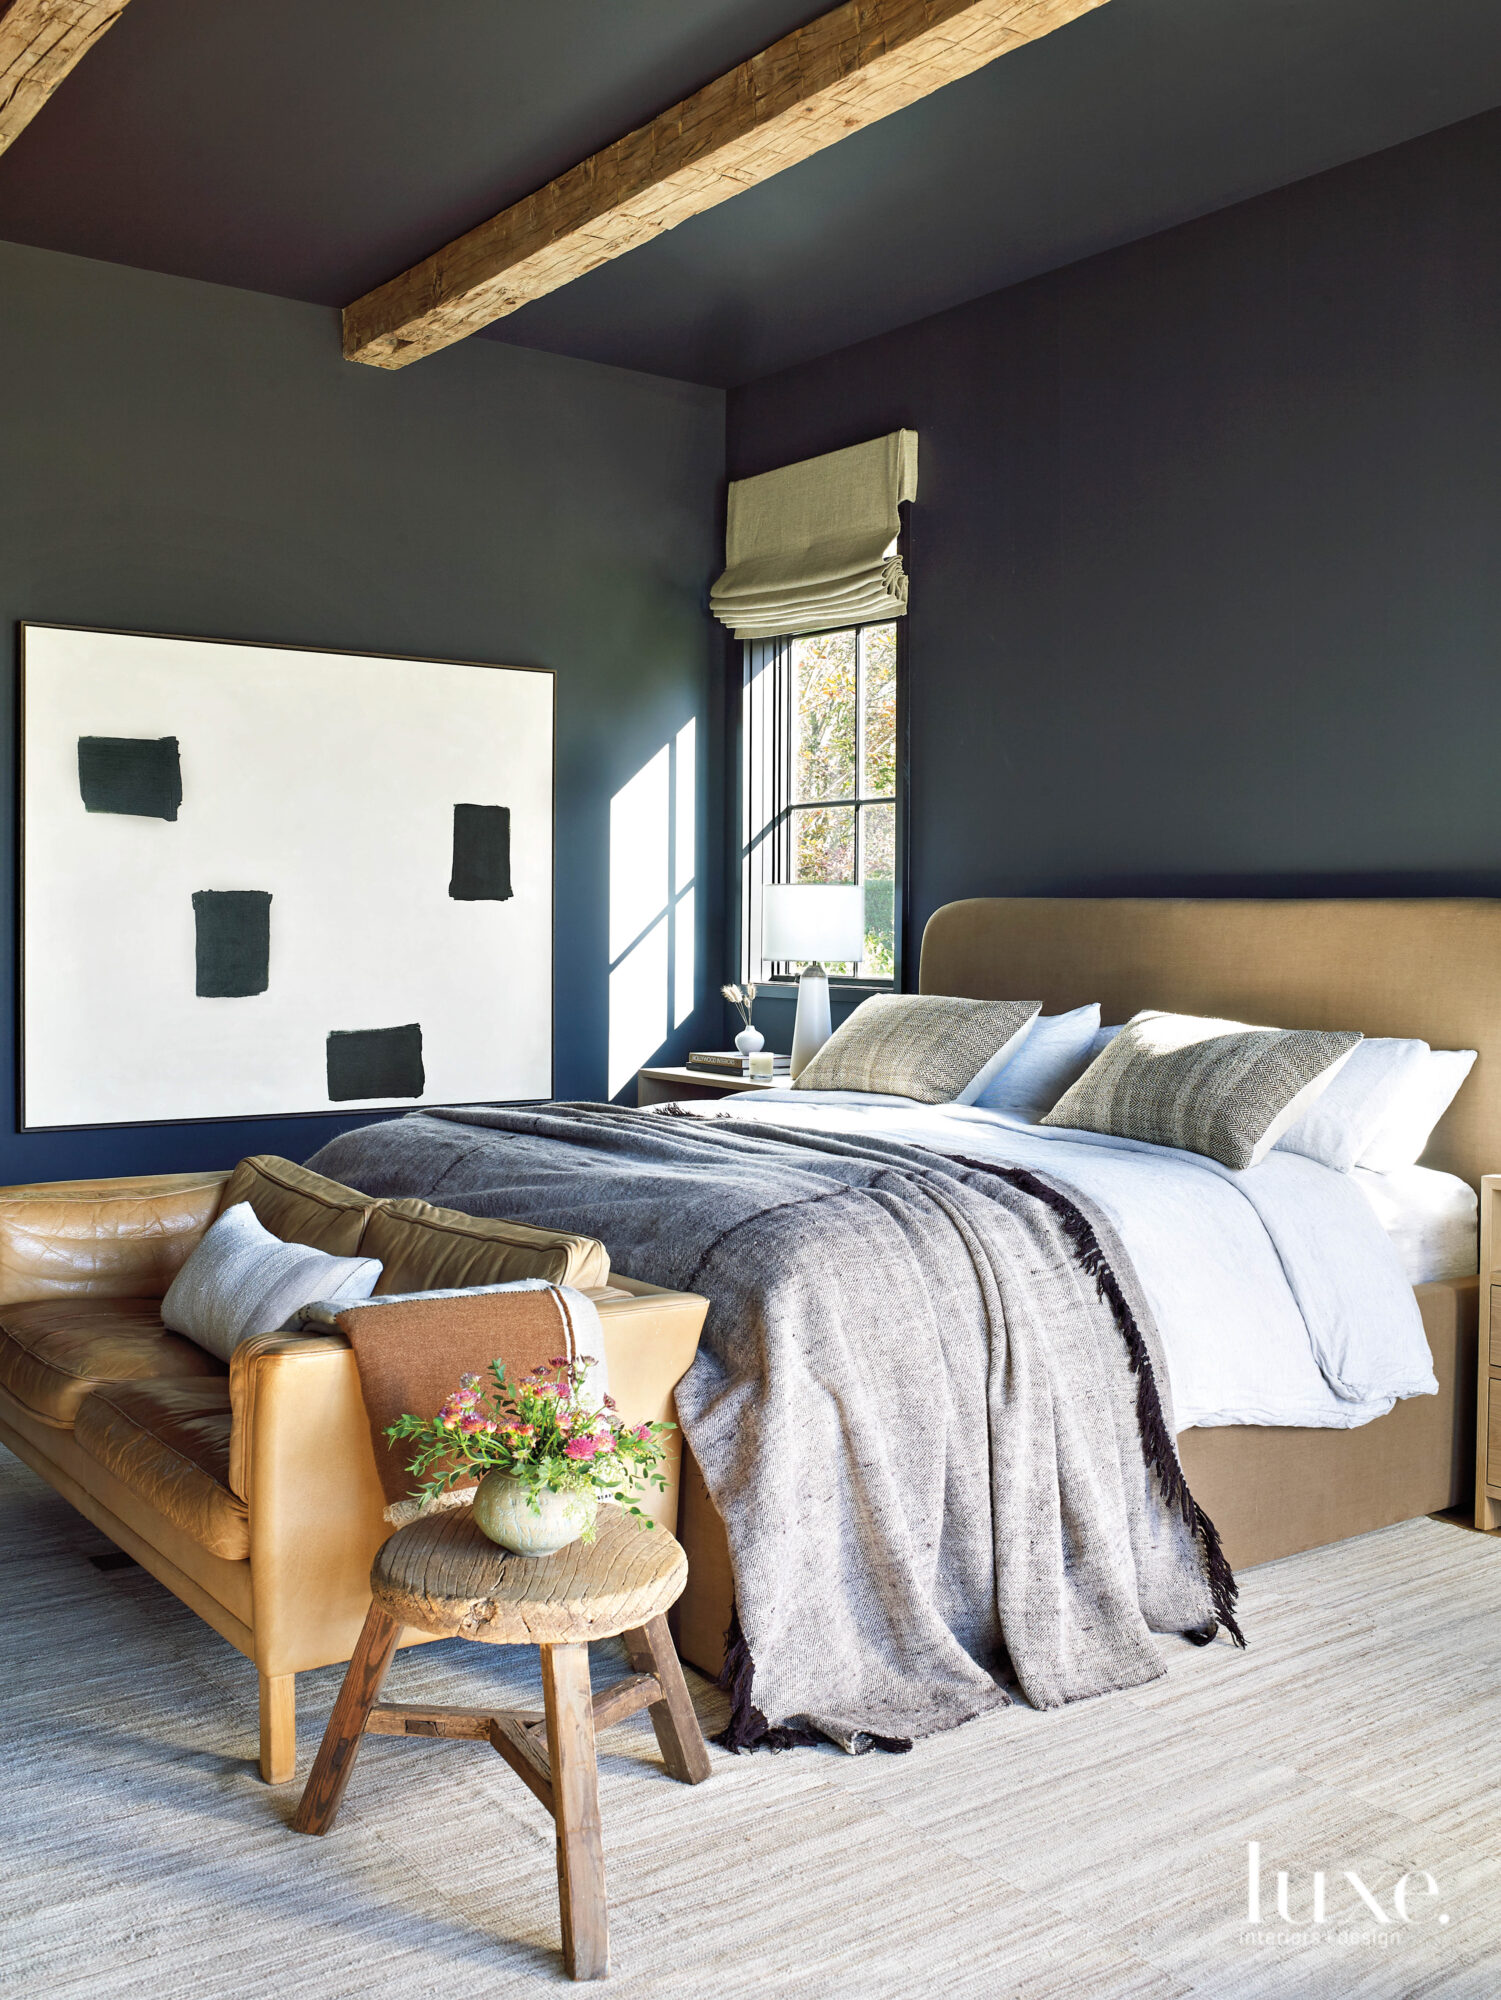 Abstract art and a small leather couch sit in the master bedroom